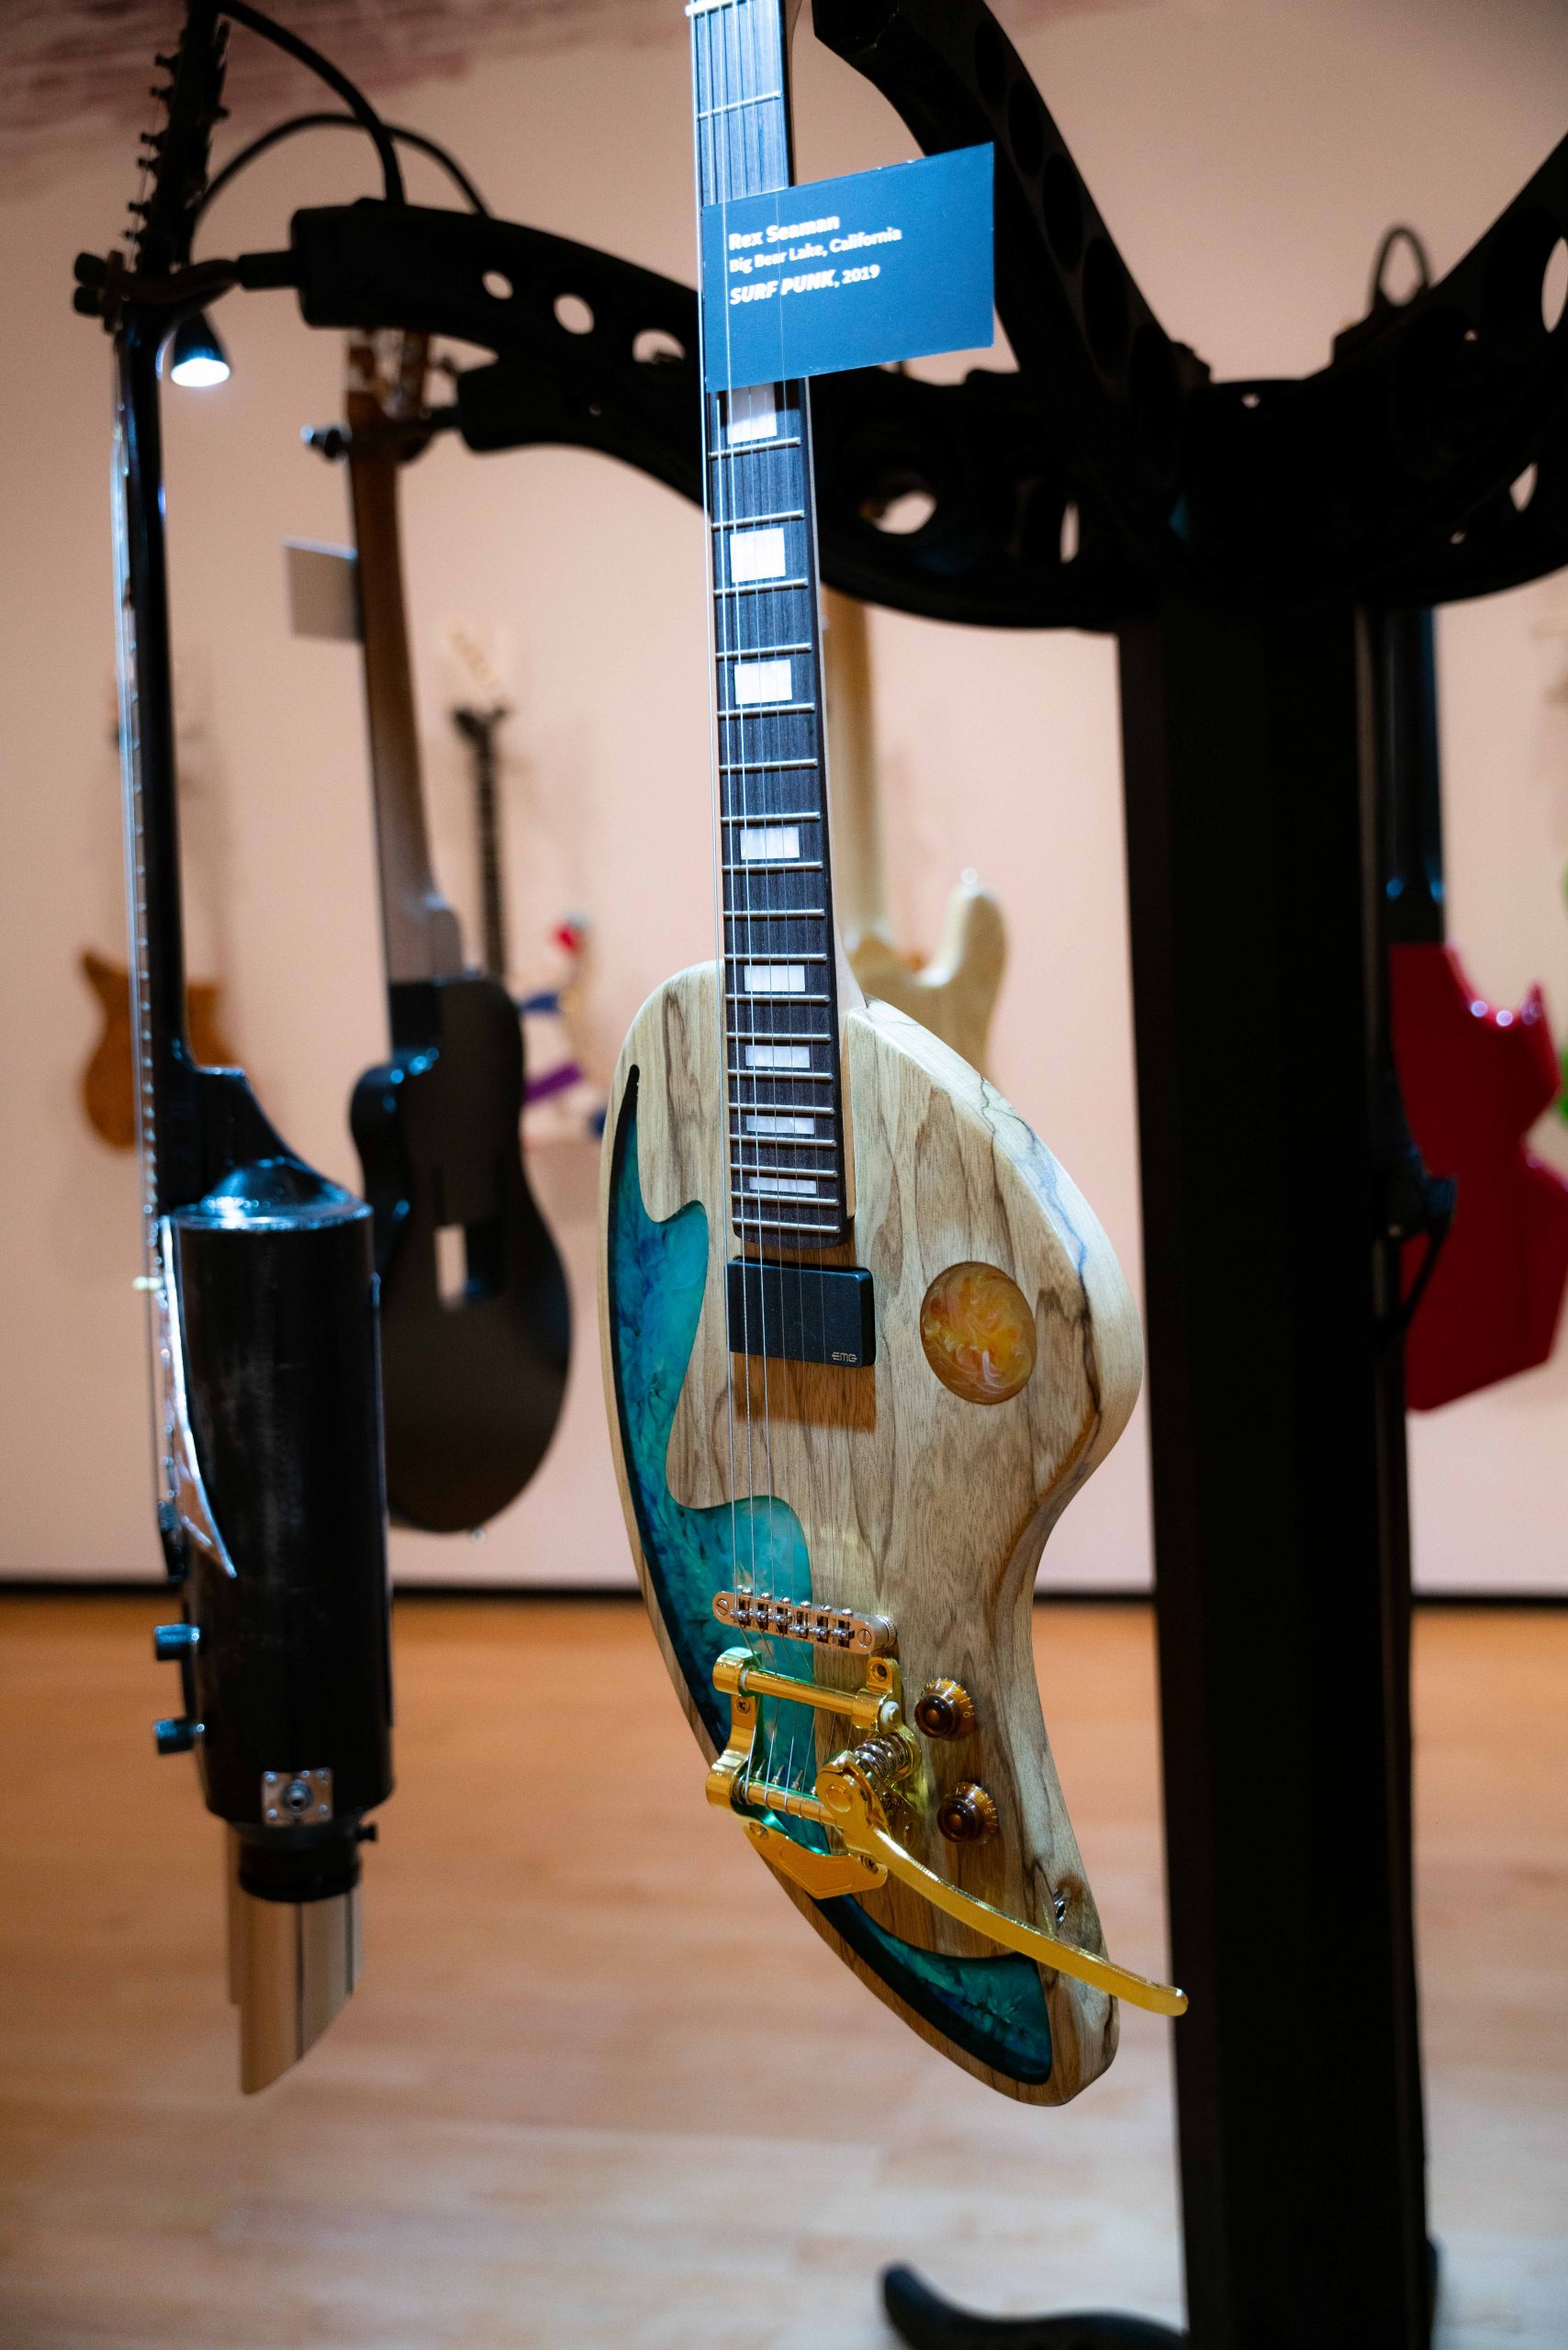 A wooden electric guitar shaped like a painters palette with gold and blue accents